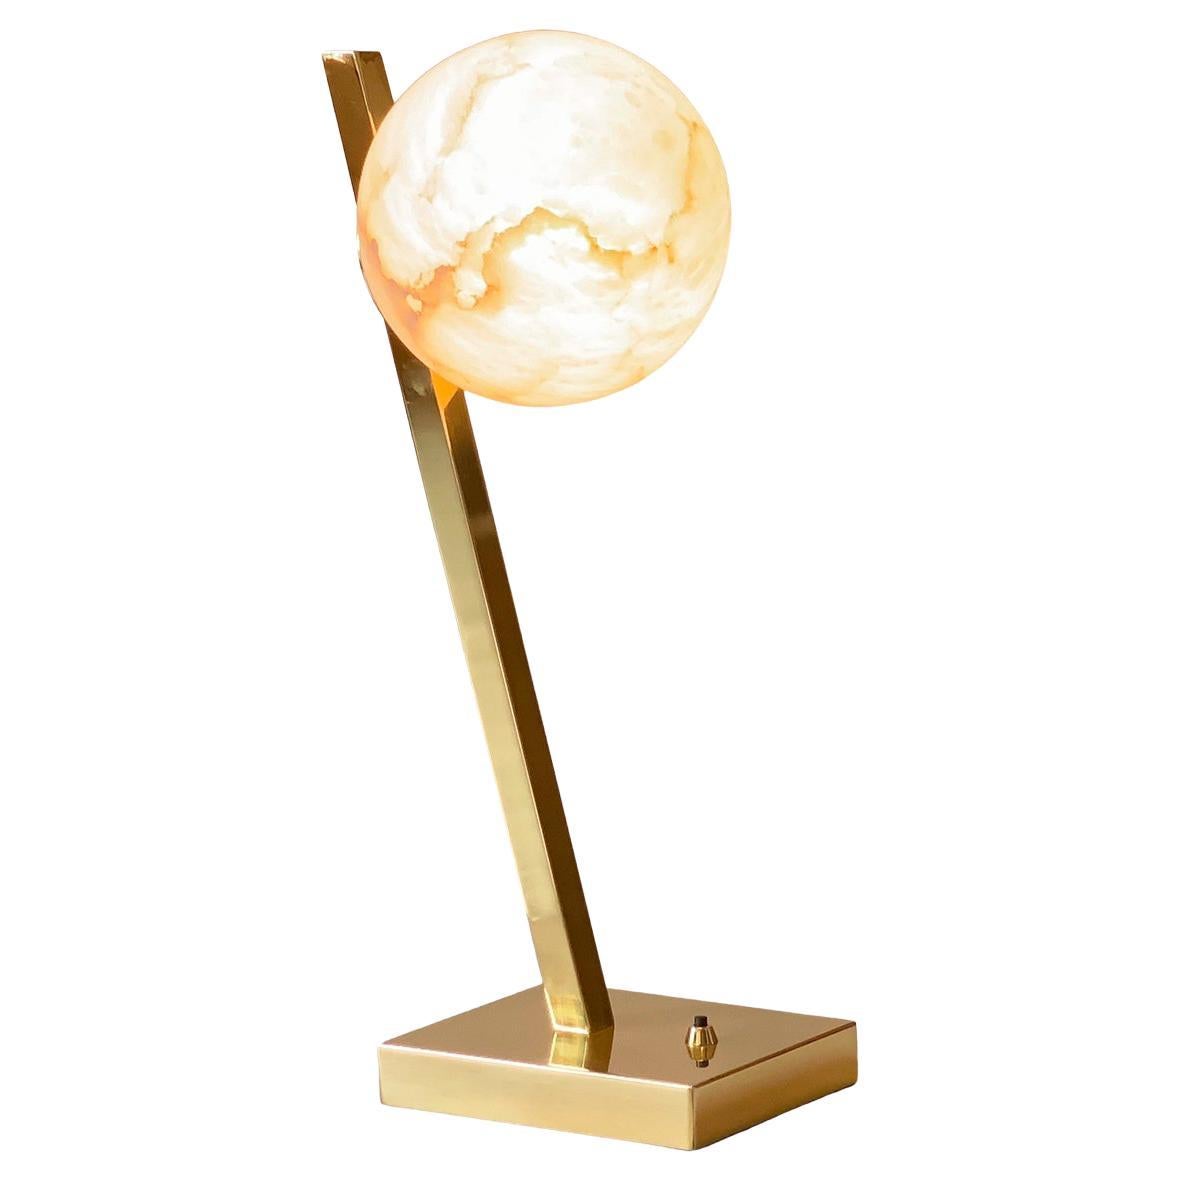 A magnificent tribute to the magical midsummer full moon, this gorgeous table lamp is crafted of elegant brass and exquisite Italian alabaster. Featuring a rectangular brass base, the offset stem showcases a carved sphere made of crystalline